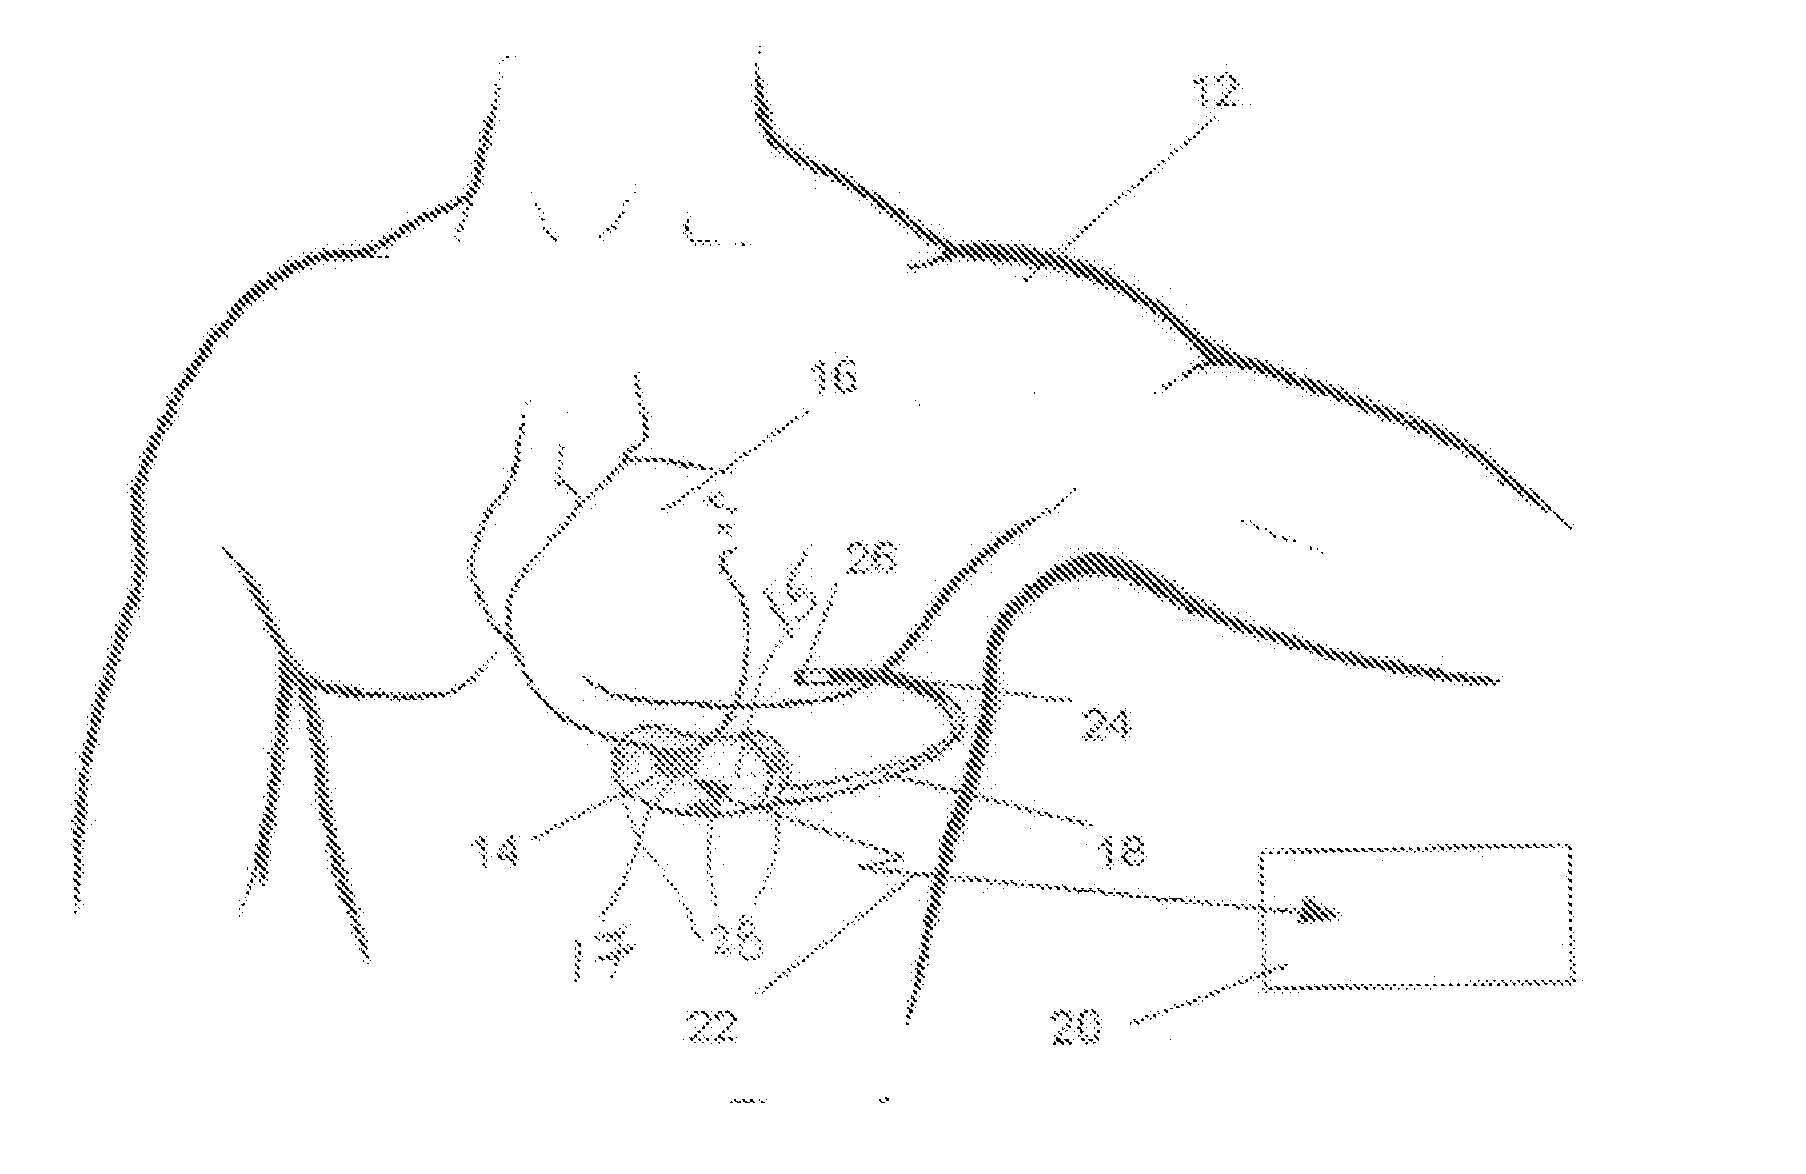 Method and apparatus for verifying a determined cardiac event in a medical device based on detected variation in hemodynamic status